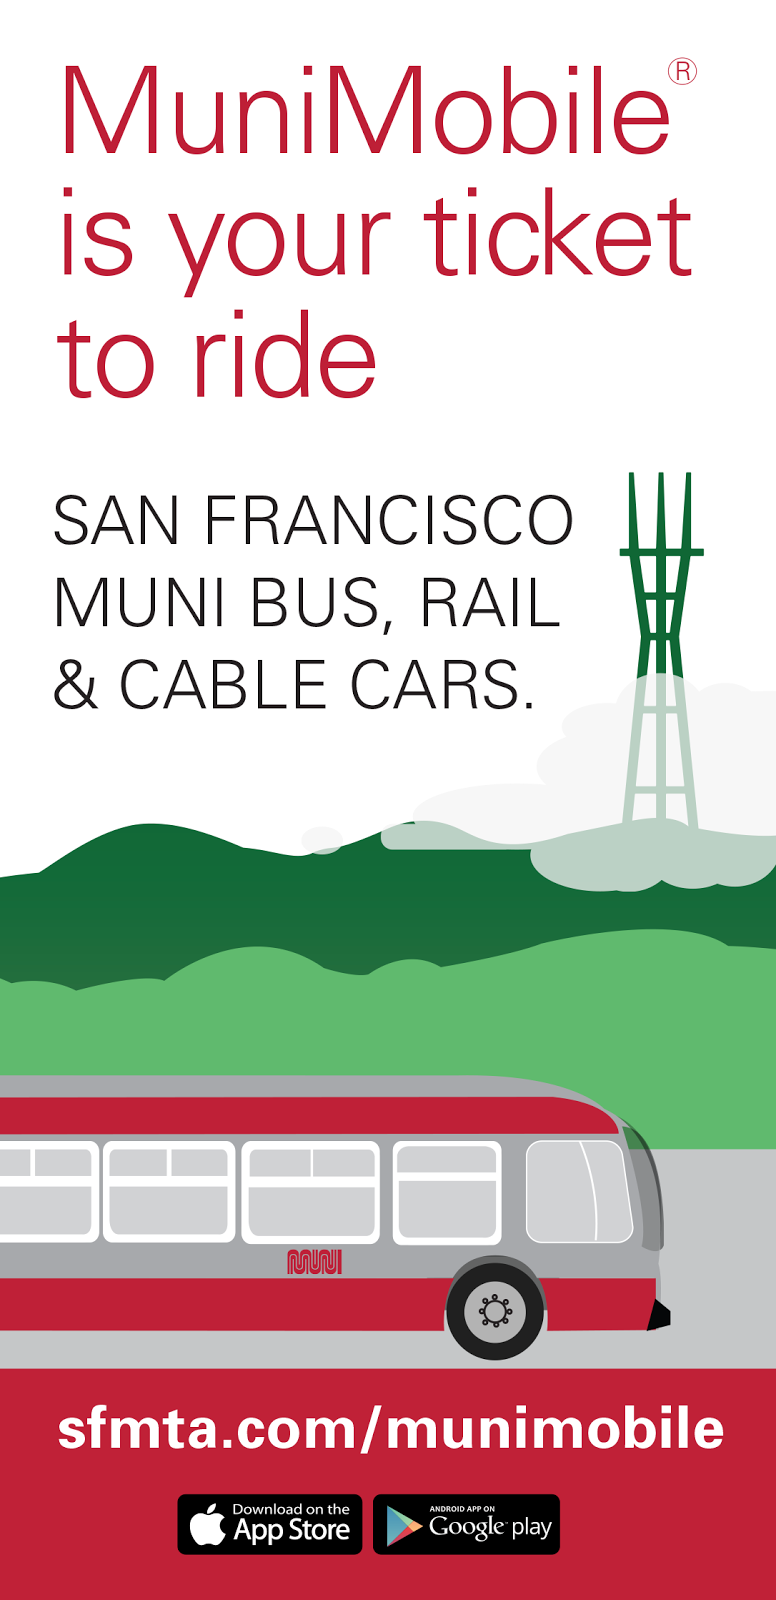 MuniMobile is your ticket to ride San Francisco Muni bus, rail and cable cars. sfmta.com/munimobile Download at the Apple App Store. Dowload at Google Play.